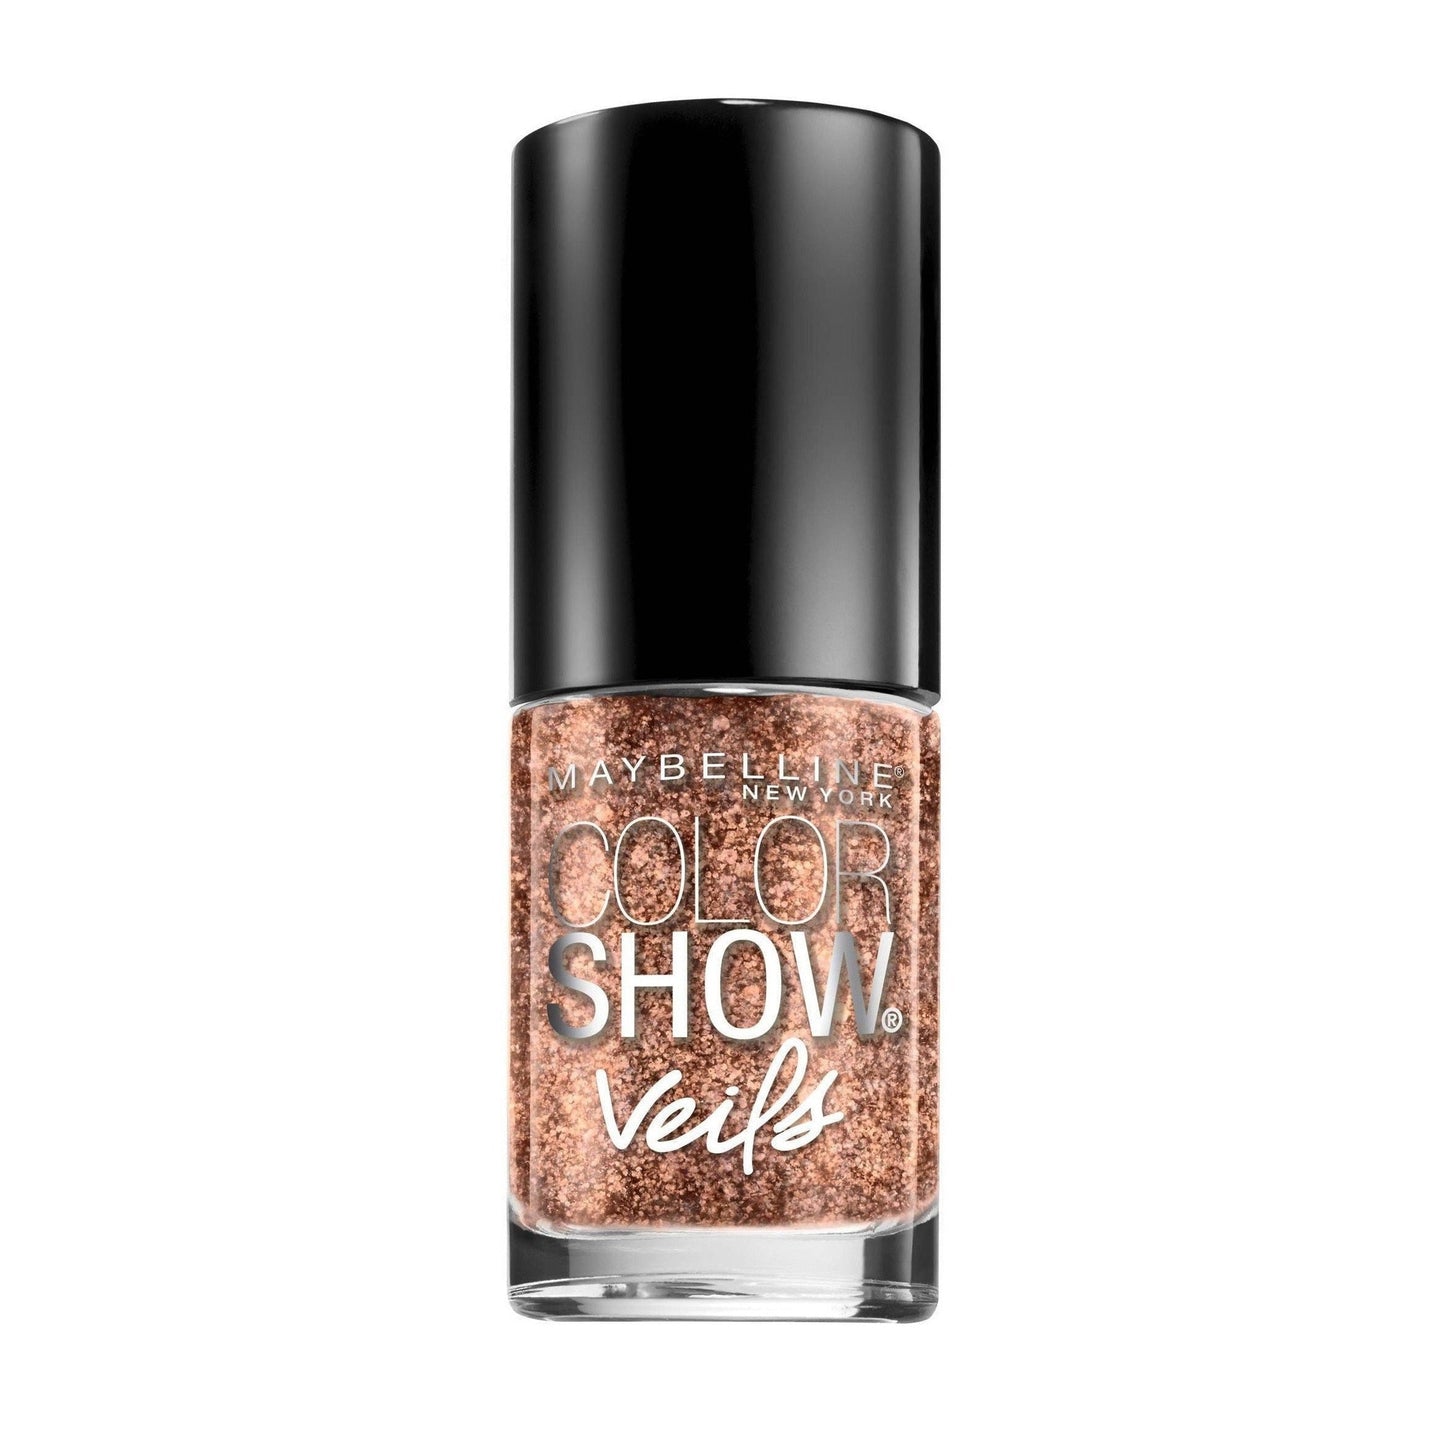 Maybelline Color Show Streak Free Nail Polish in 8 Color Options - Buy More, Save More!